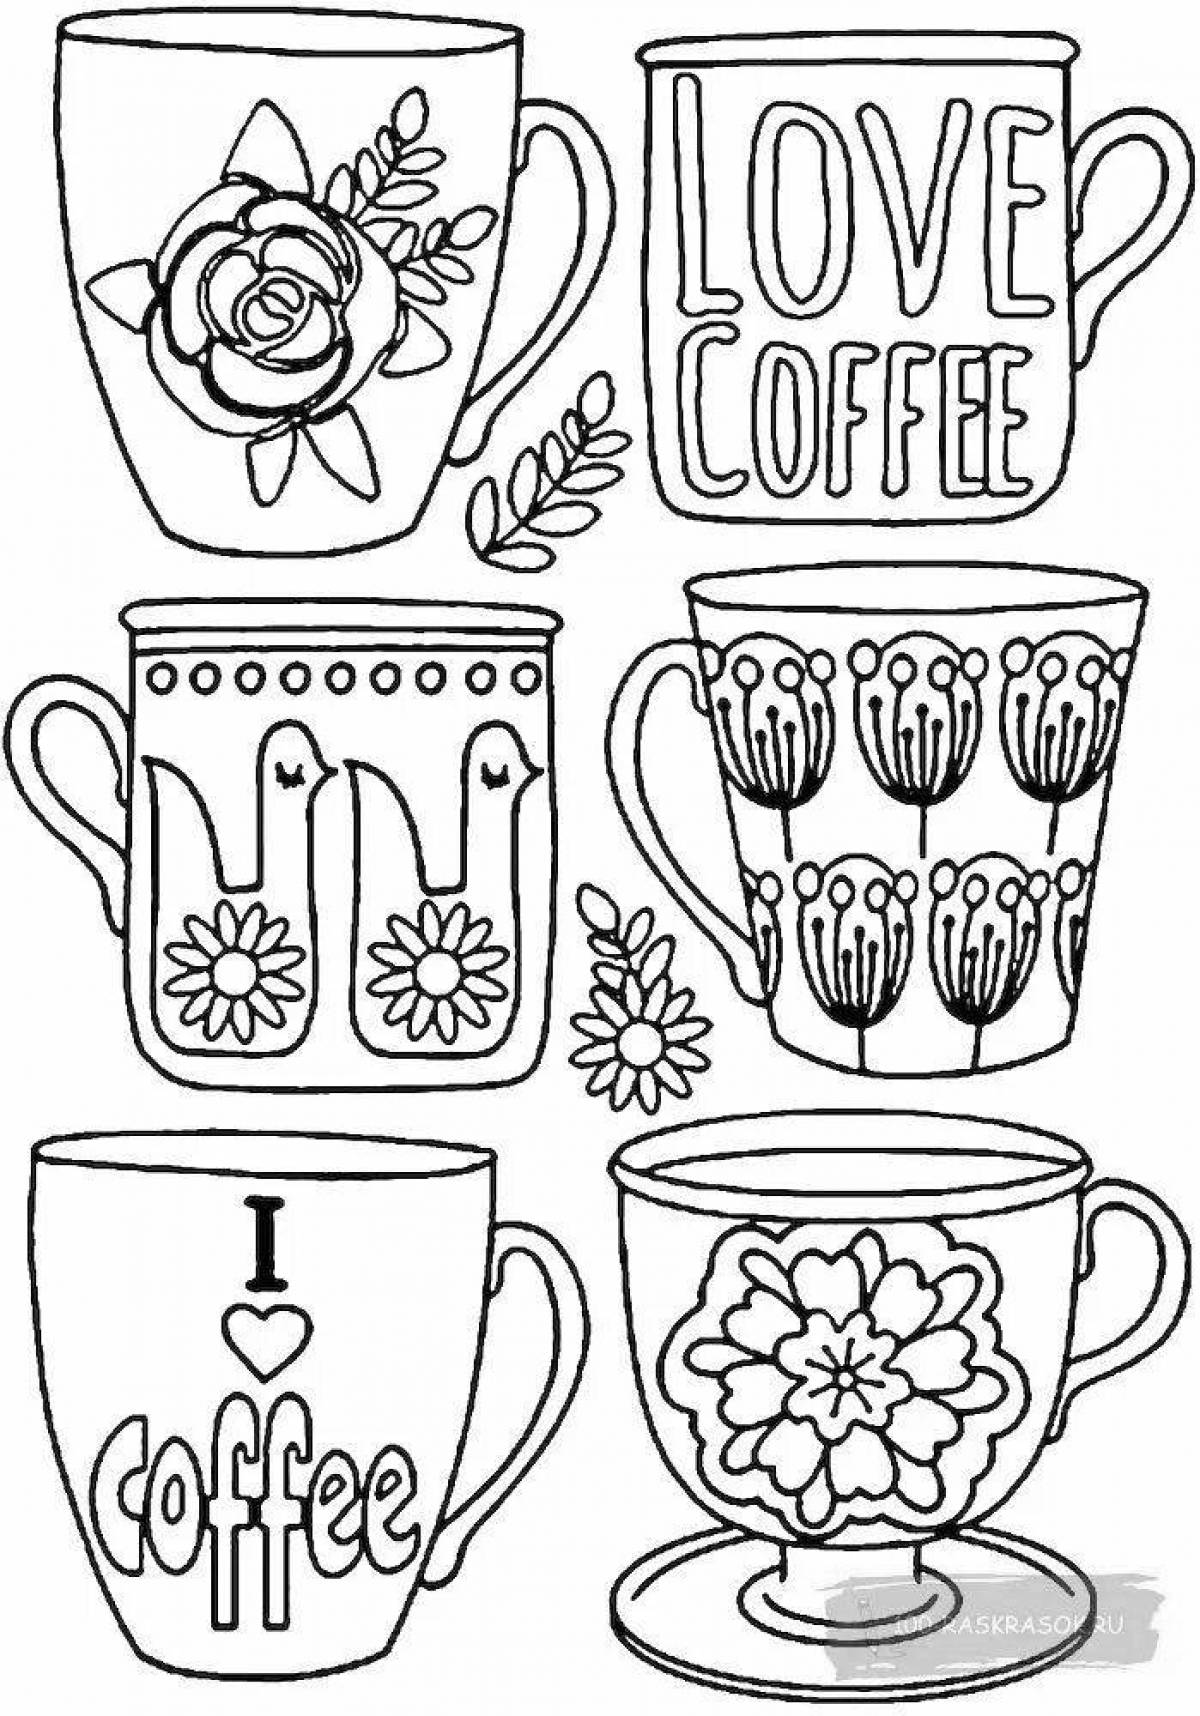 Coloring book stylish mug with a fixed price